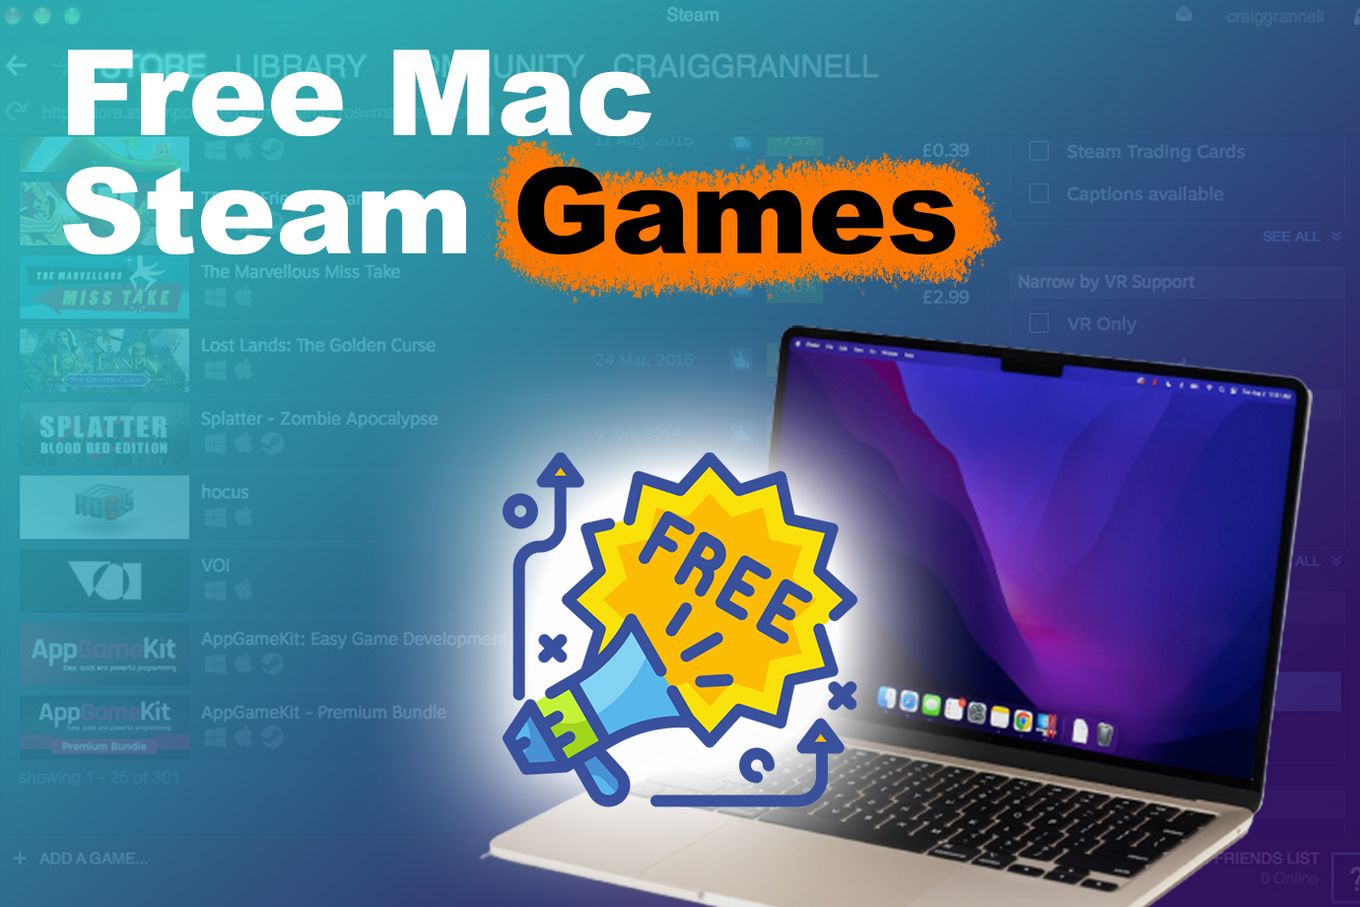 🔥Top 5 Free Games In Steam For 2GB RAM Low End PCs